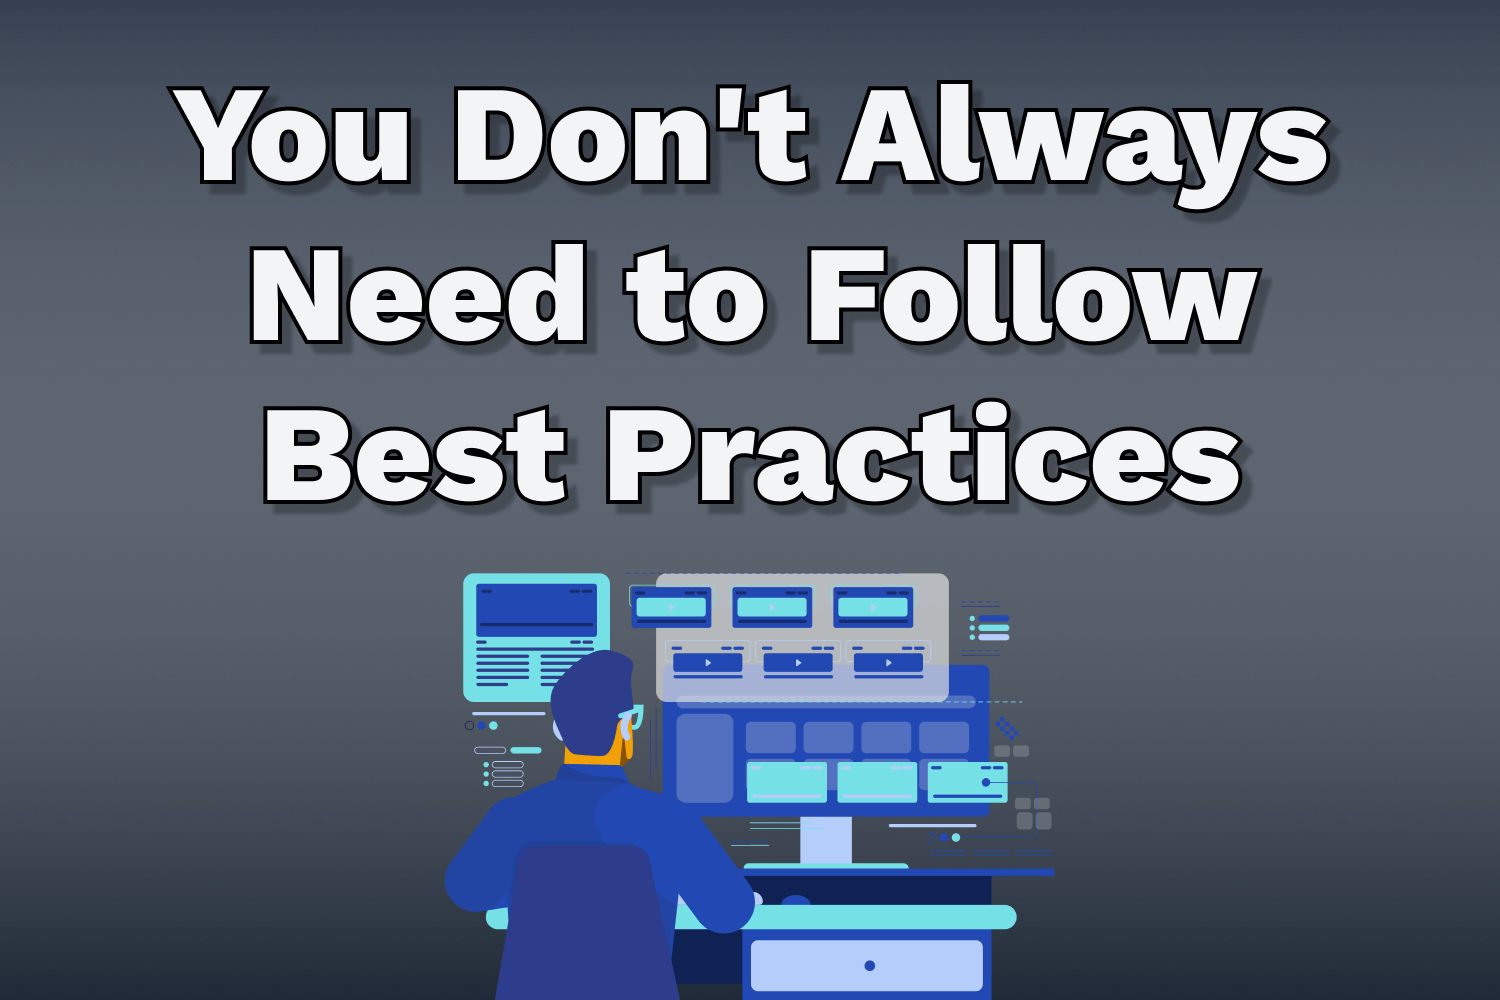 You Don't Always Need to Follow Best Practices